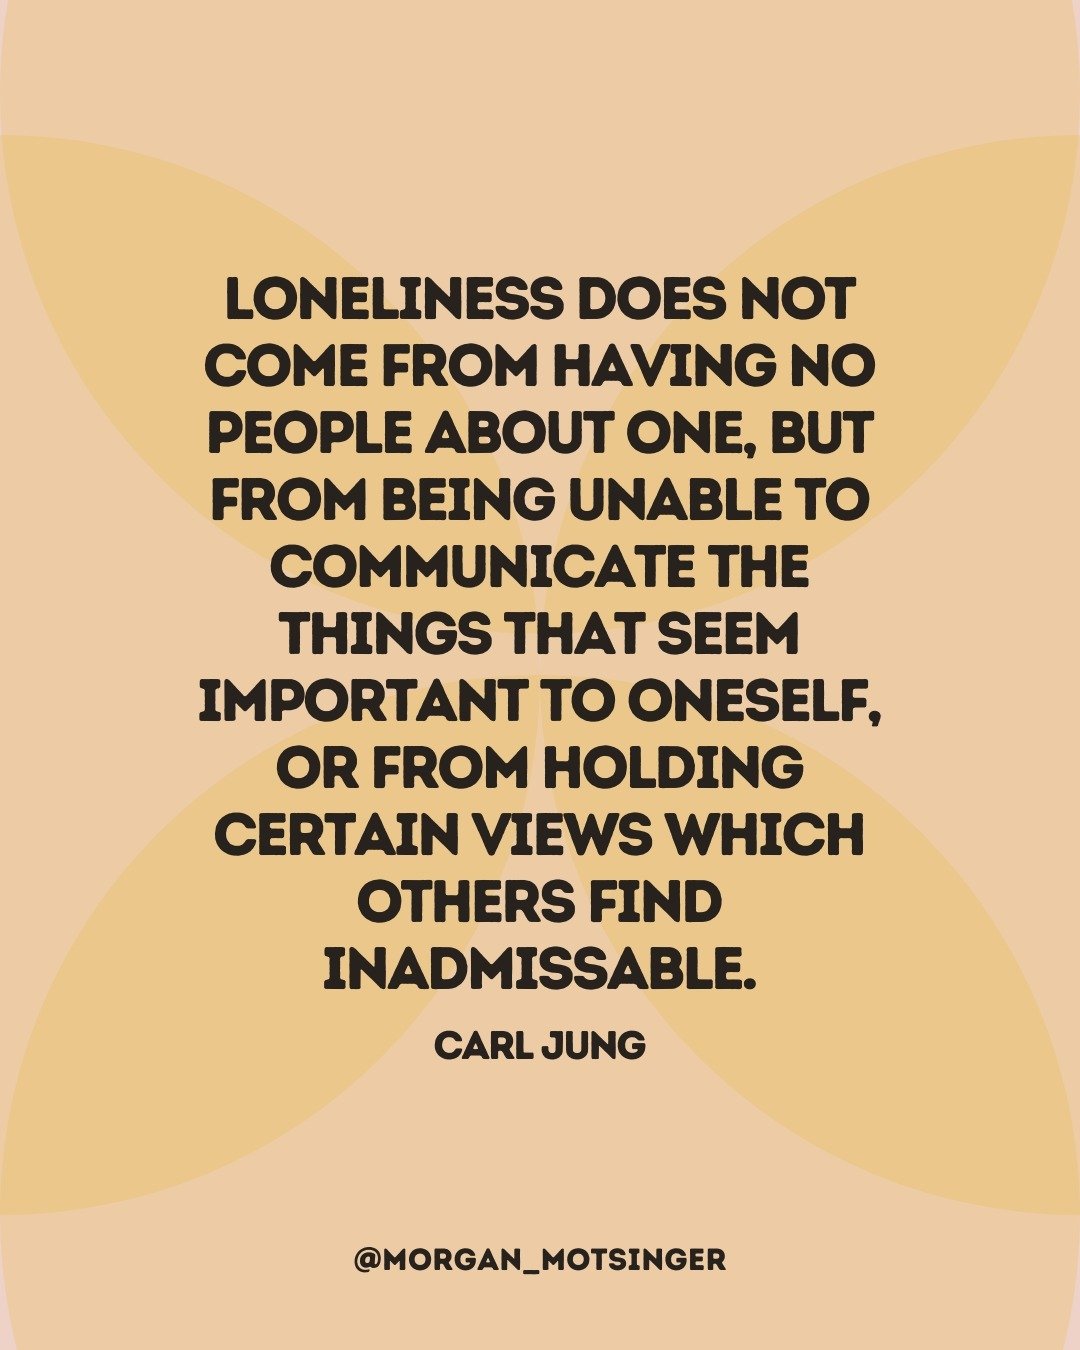 Loneliness can happen even when you've got a big family. 

Loneliness can happen when you're in a committed relationship.

Loneliness can happen when you have a strong religious or spiritual community.

Loneliness occurs when you've learned it's unsa